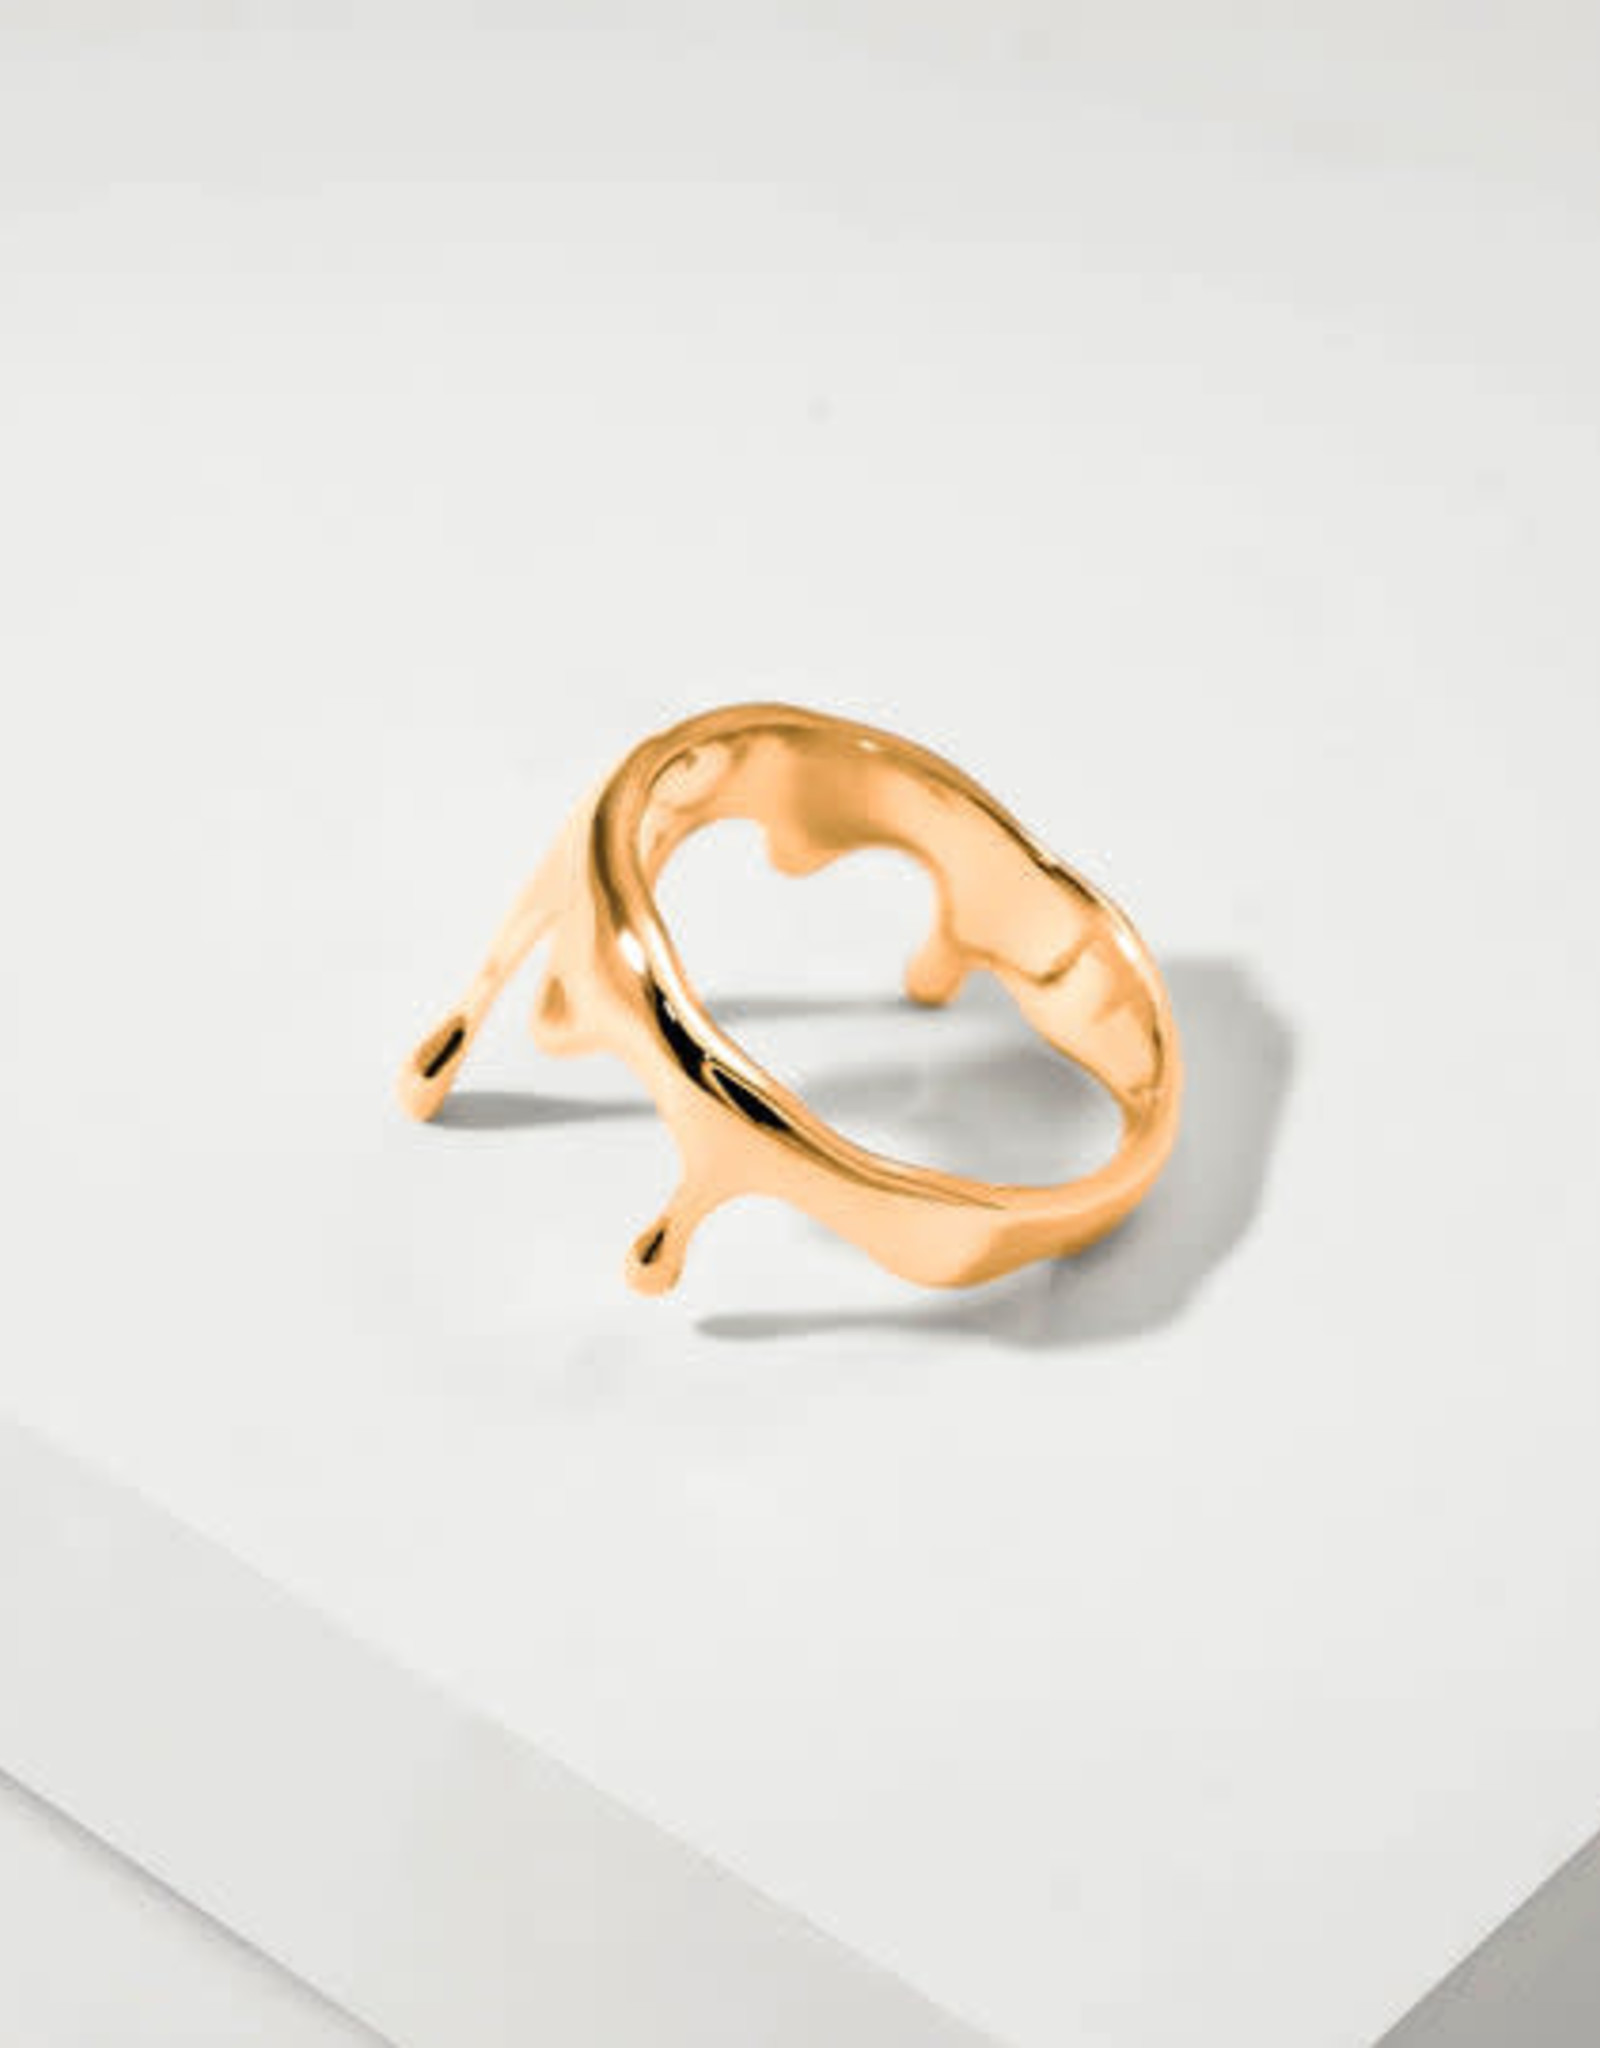 Marie June Jewelry Rivulets Small Gold Ring, 24k Gold Vermeil Sterling Silver